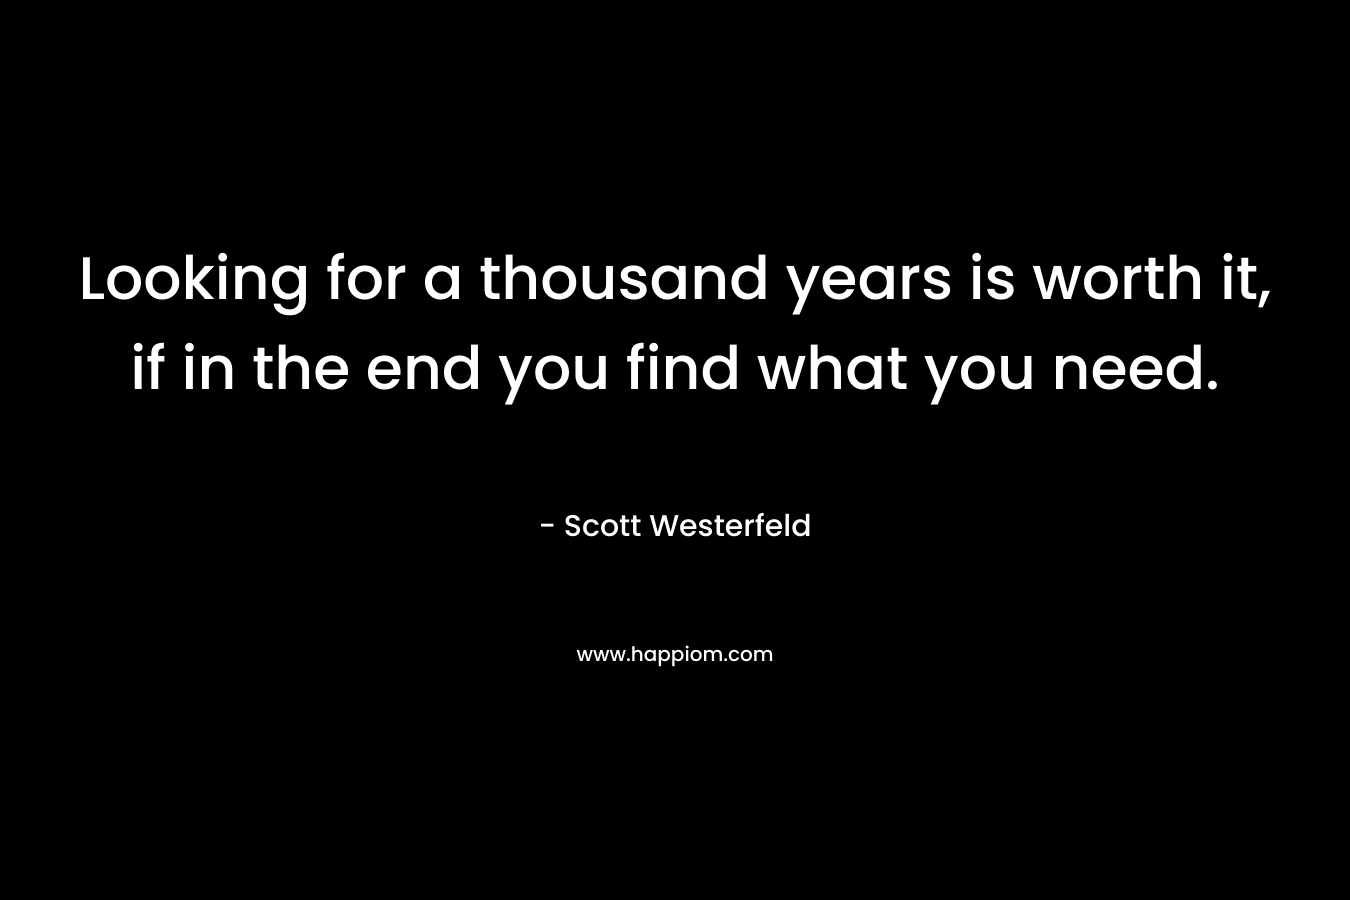 Looking for a thousand years is worth it, if in the end you find what you need.